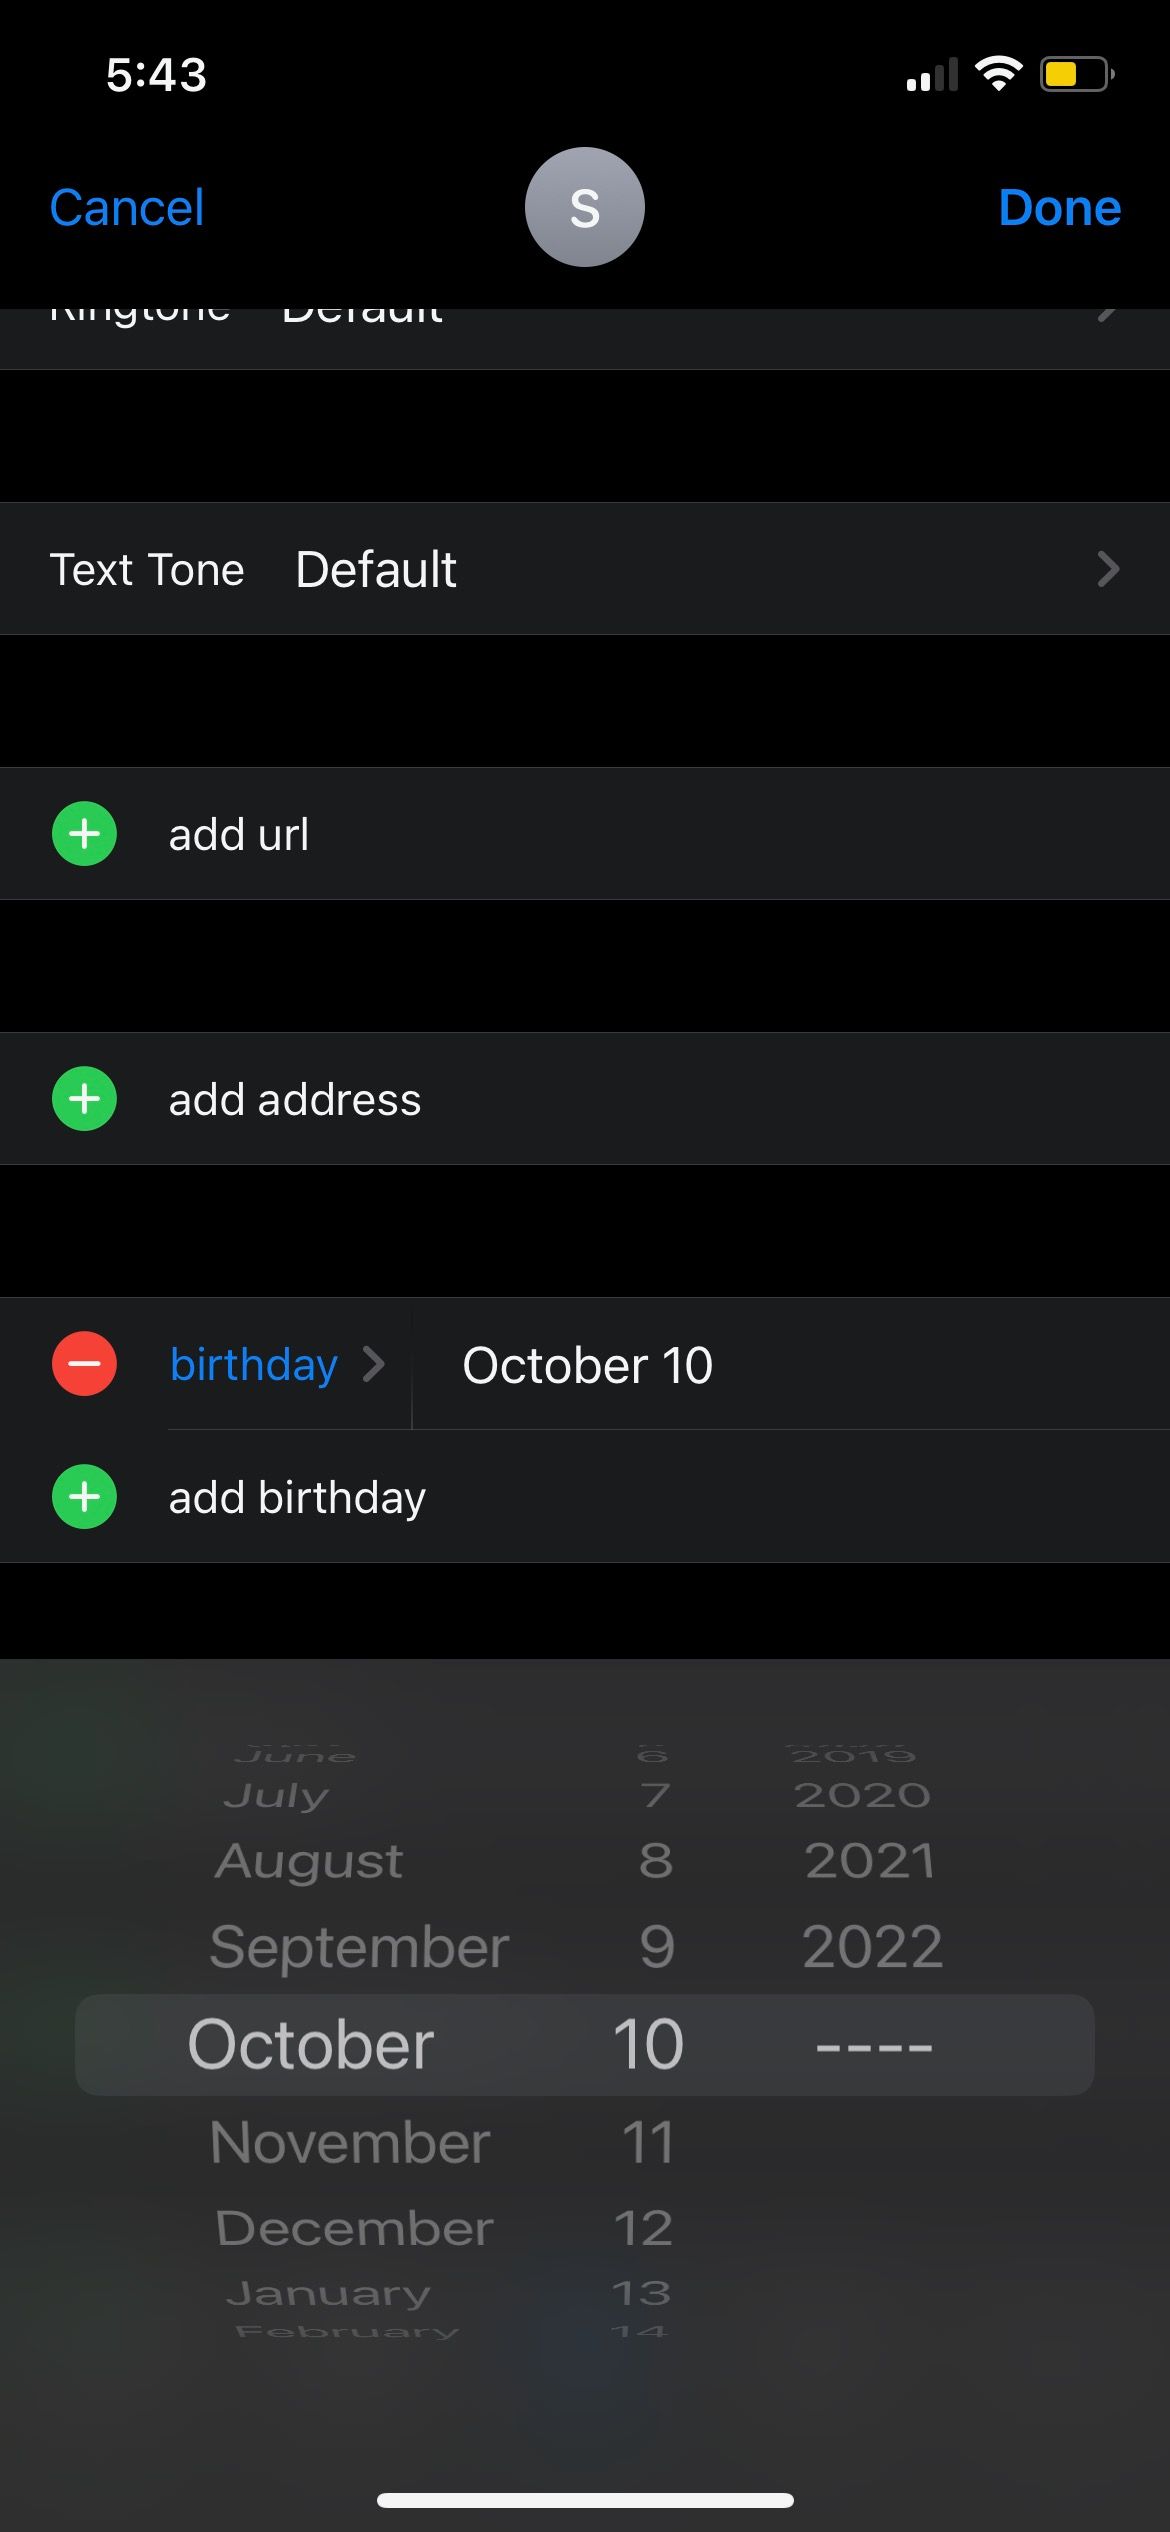 Adding a birthday to a contact on iPhone